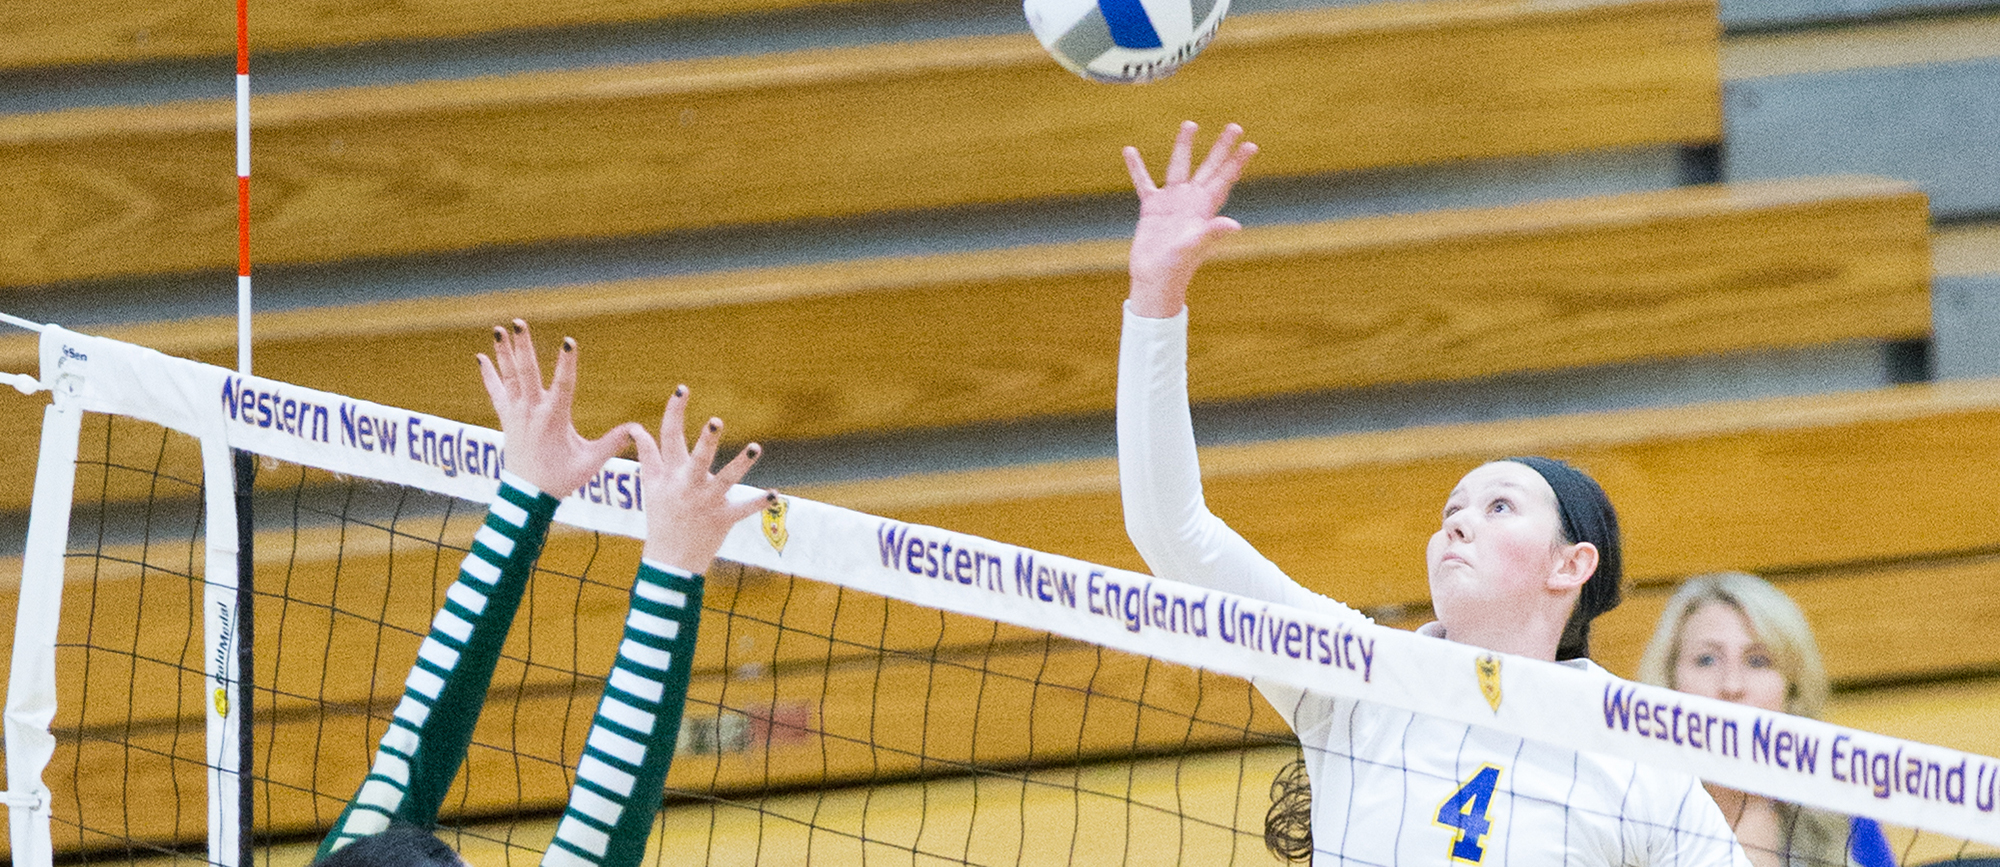 Senior Sam Heffer recorded a team-high ten kills in Western New England's 3-0 loss to Wellesley on Thursday night. (Photo by Chris Marion)